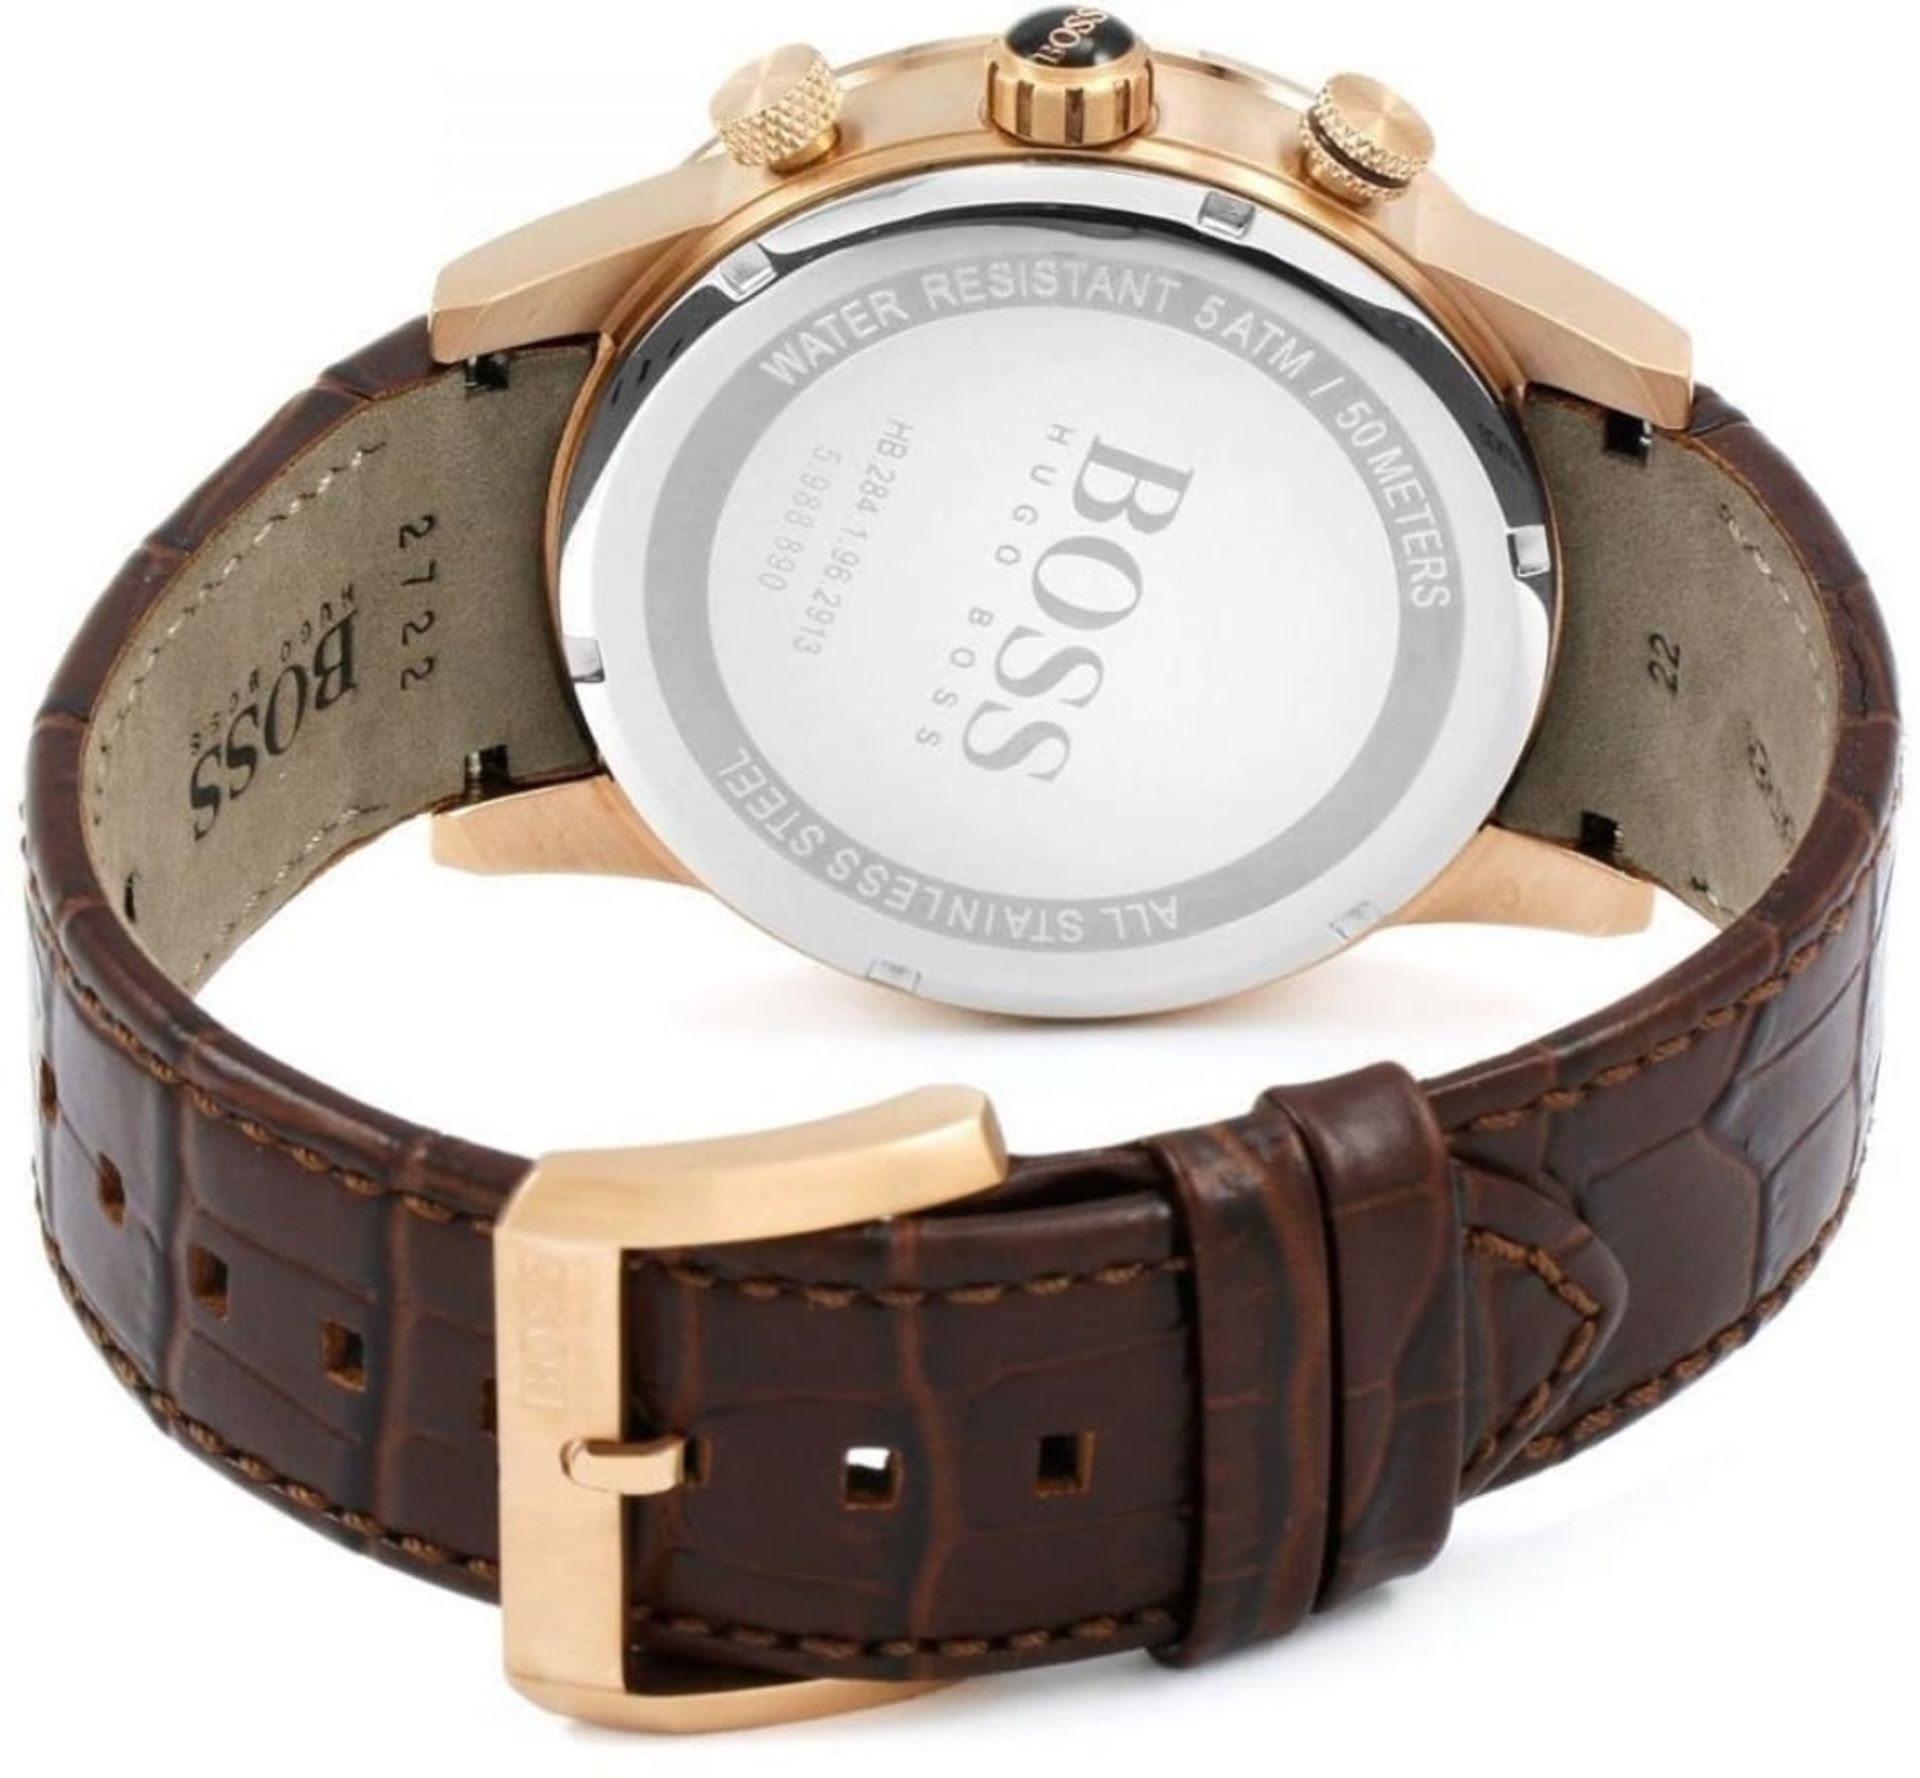 Hugo Boss 1513392 Men's Rafale Brown Leather Strap Chronograph Watch - Image 5 of 7